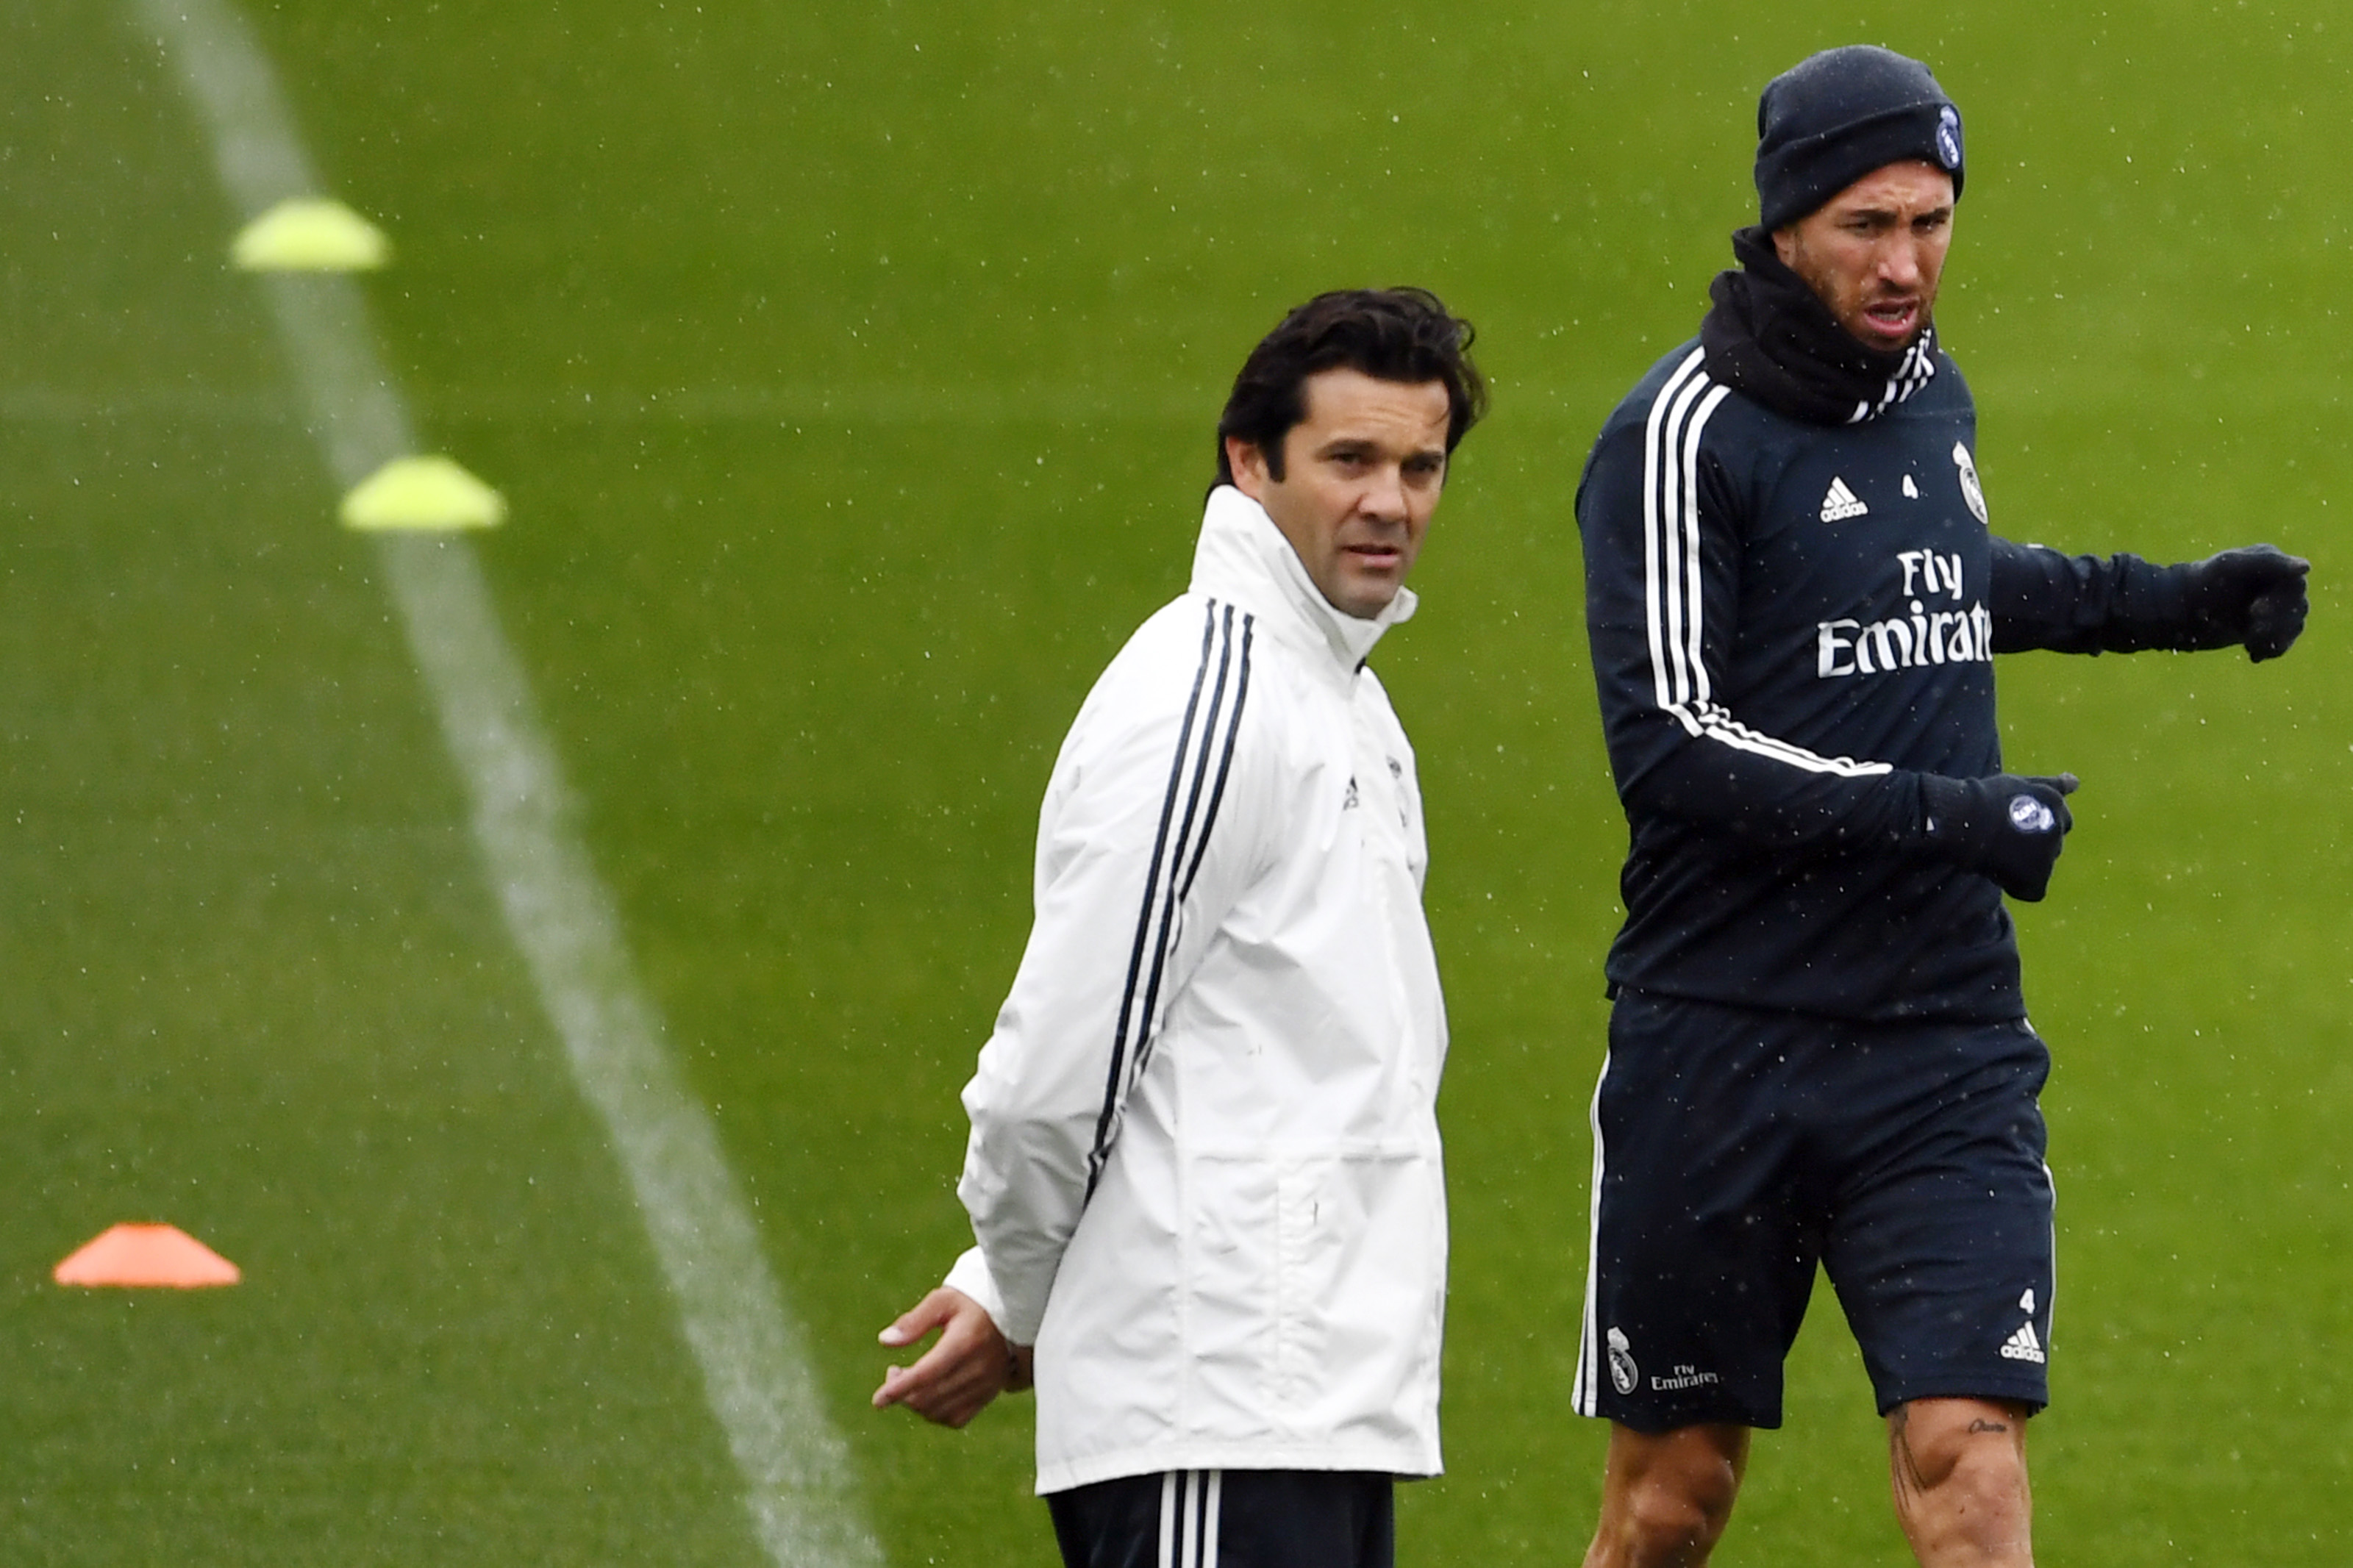 Temporary coach of Real Madrid CF, Argentinian former player Santiago Solari (L) and Real Madrid's Spanish defender Sergio Ramos attend a training session at the Ciudad Real Madrid training facilities in Madrid's suburb of Valdebebas, on October 30, 2018. - Santiago Solari has been put in temporary charge of Real Madrid after Julen Lopetegui was sacked on October 29, 2018. Solari was the coach of Madrid's B team, Castilla, and is now expected to take Madrid for their Copa del Rey game against Melilla tomorrow. (Photo by GABRIEL BOUYS / AFP)        (Photo credit should read GABRIEL BOUYS/AFP/Getty Images)